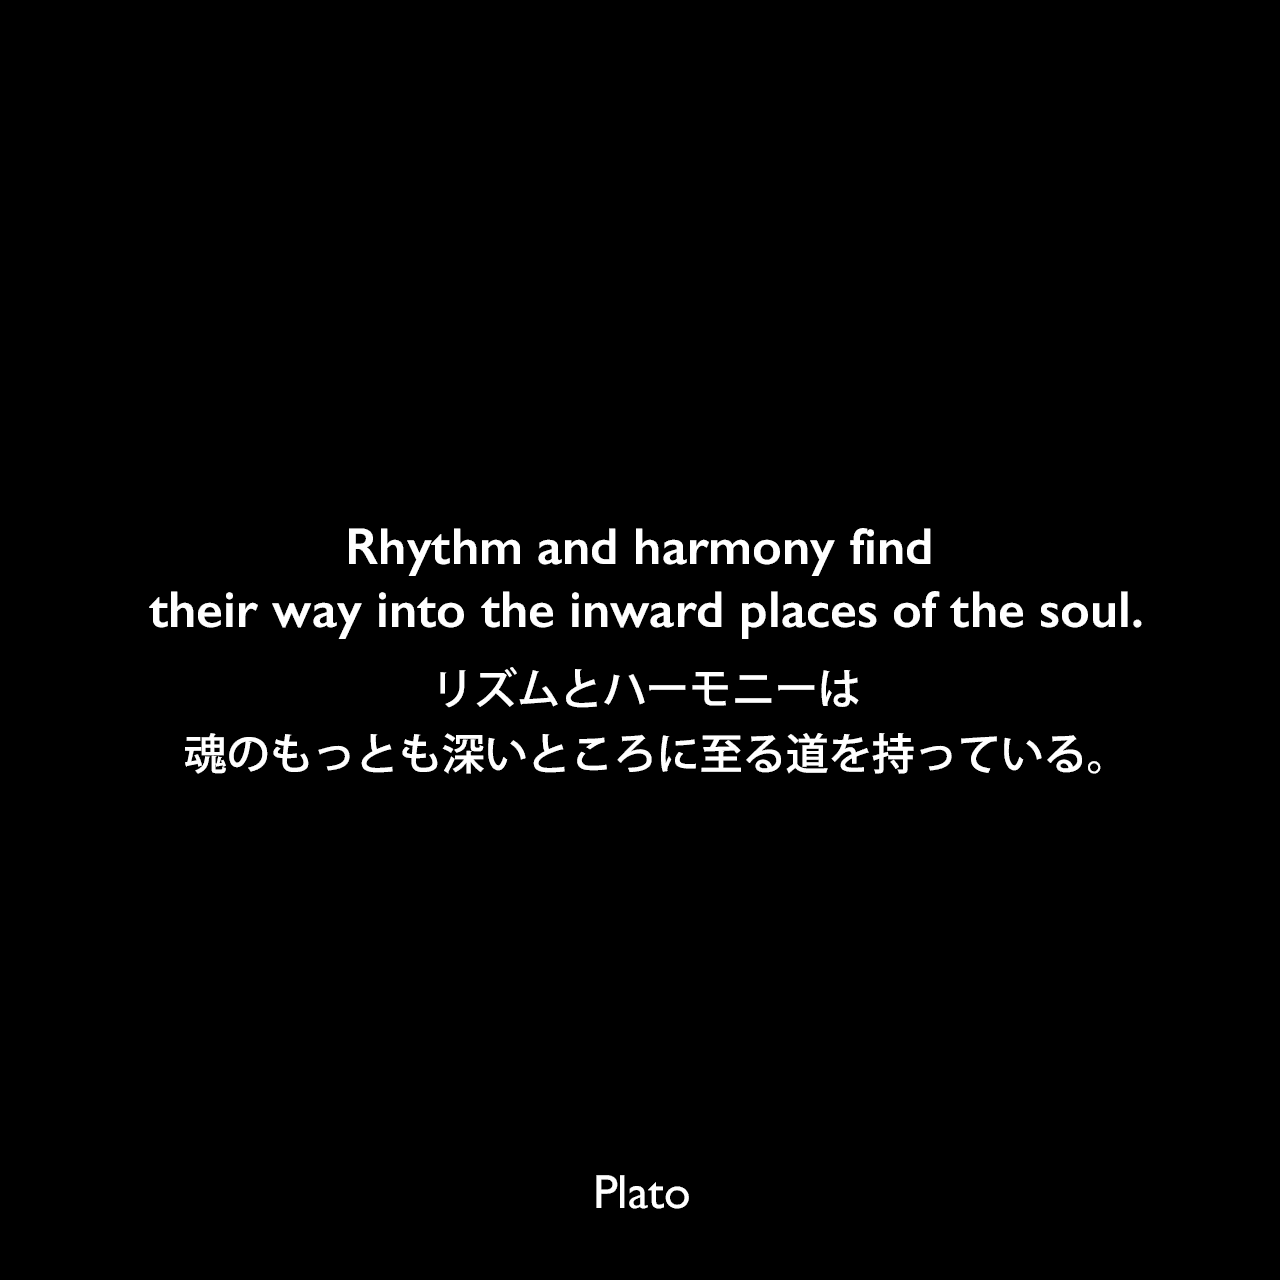 Rhythm and harmony find their way into the inward places of the soul.リズムとハーモニーは、魂のもっとも深いところに至る道を持っている。Plato